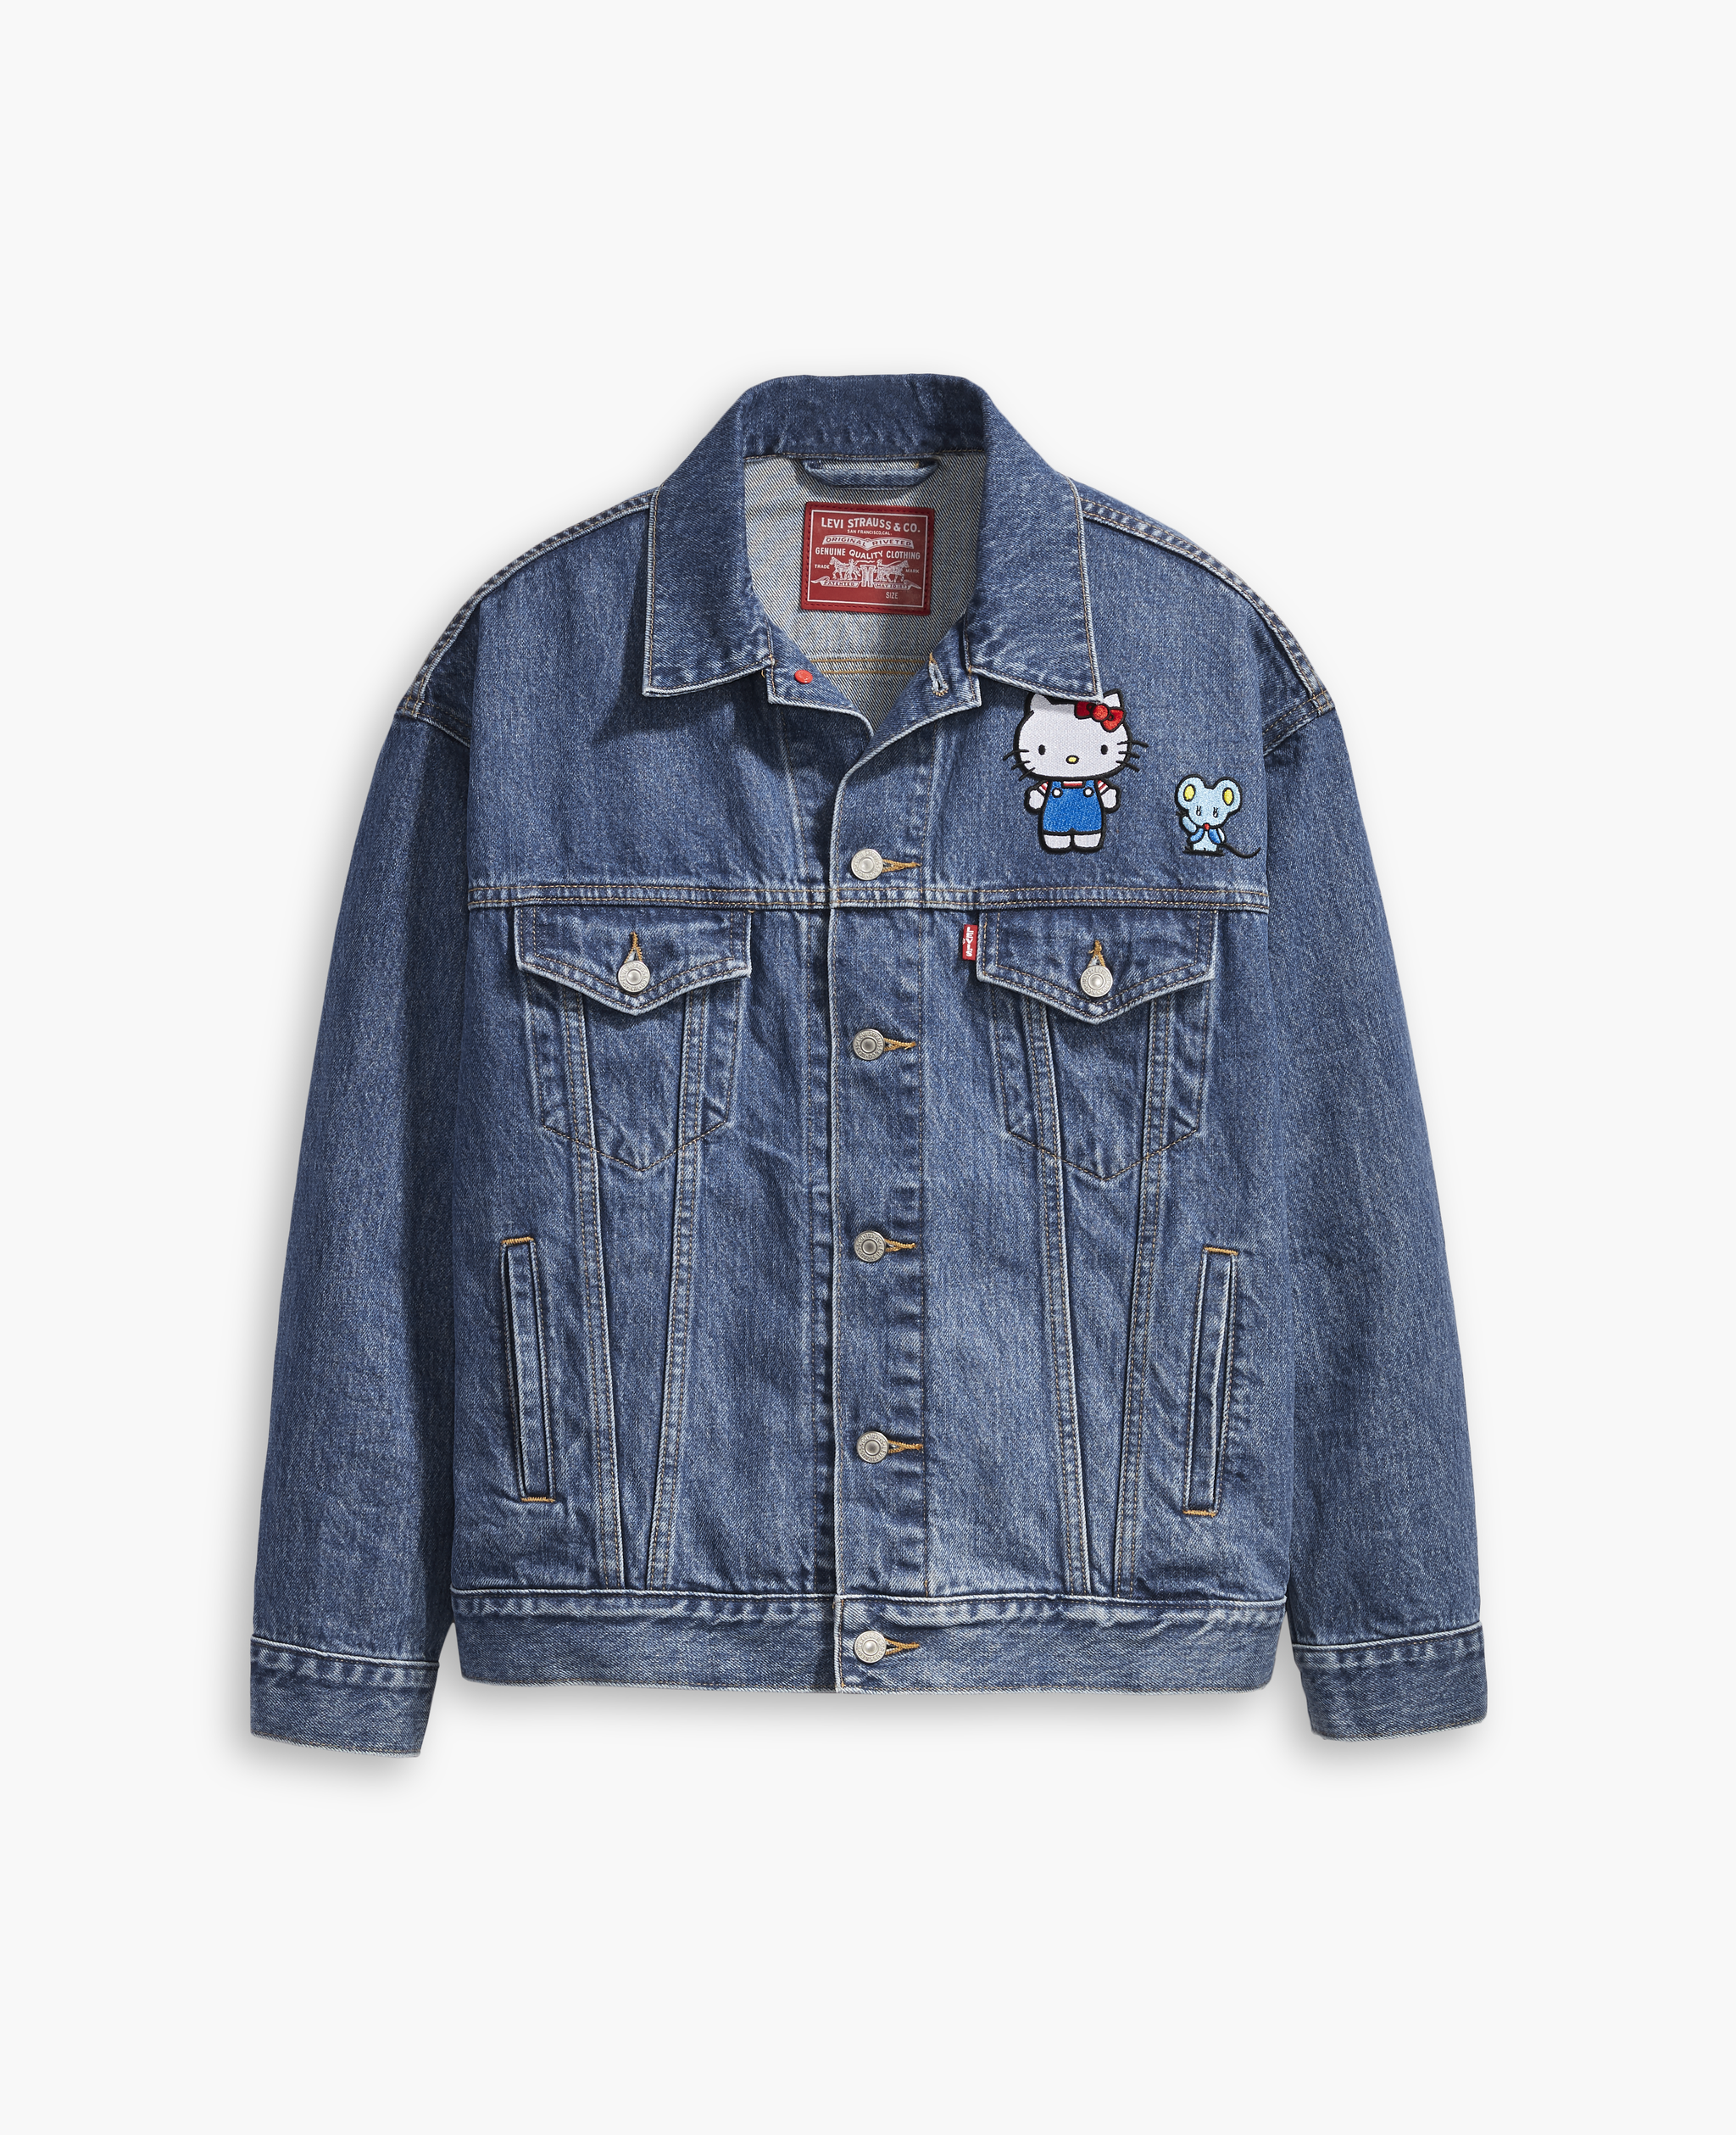 Levi's x Hello Kitty Dad Trucker Jacket | You've Got to Be Kitten Me —  Levi's New Hello Kitty Collection Is Too Cute For Words | POPSUGAR Fashion  Photo 20